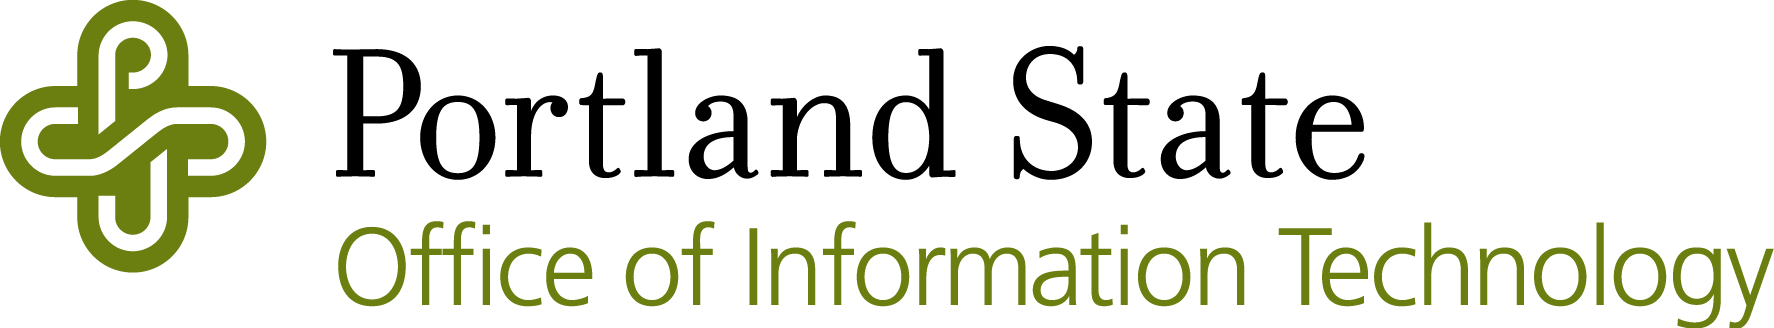 Logo of the Office of Information Technology for Portland State University